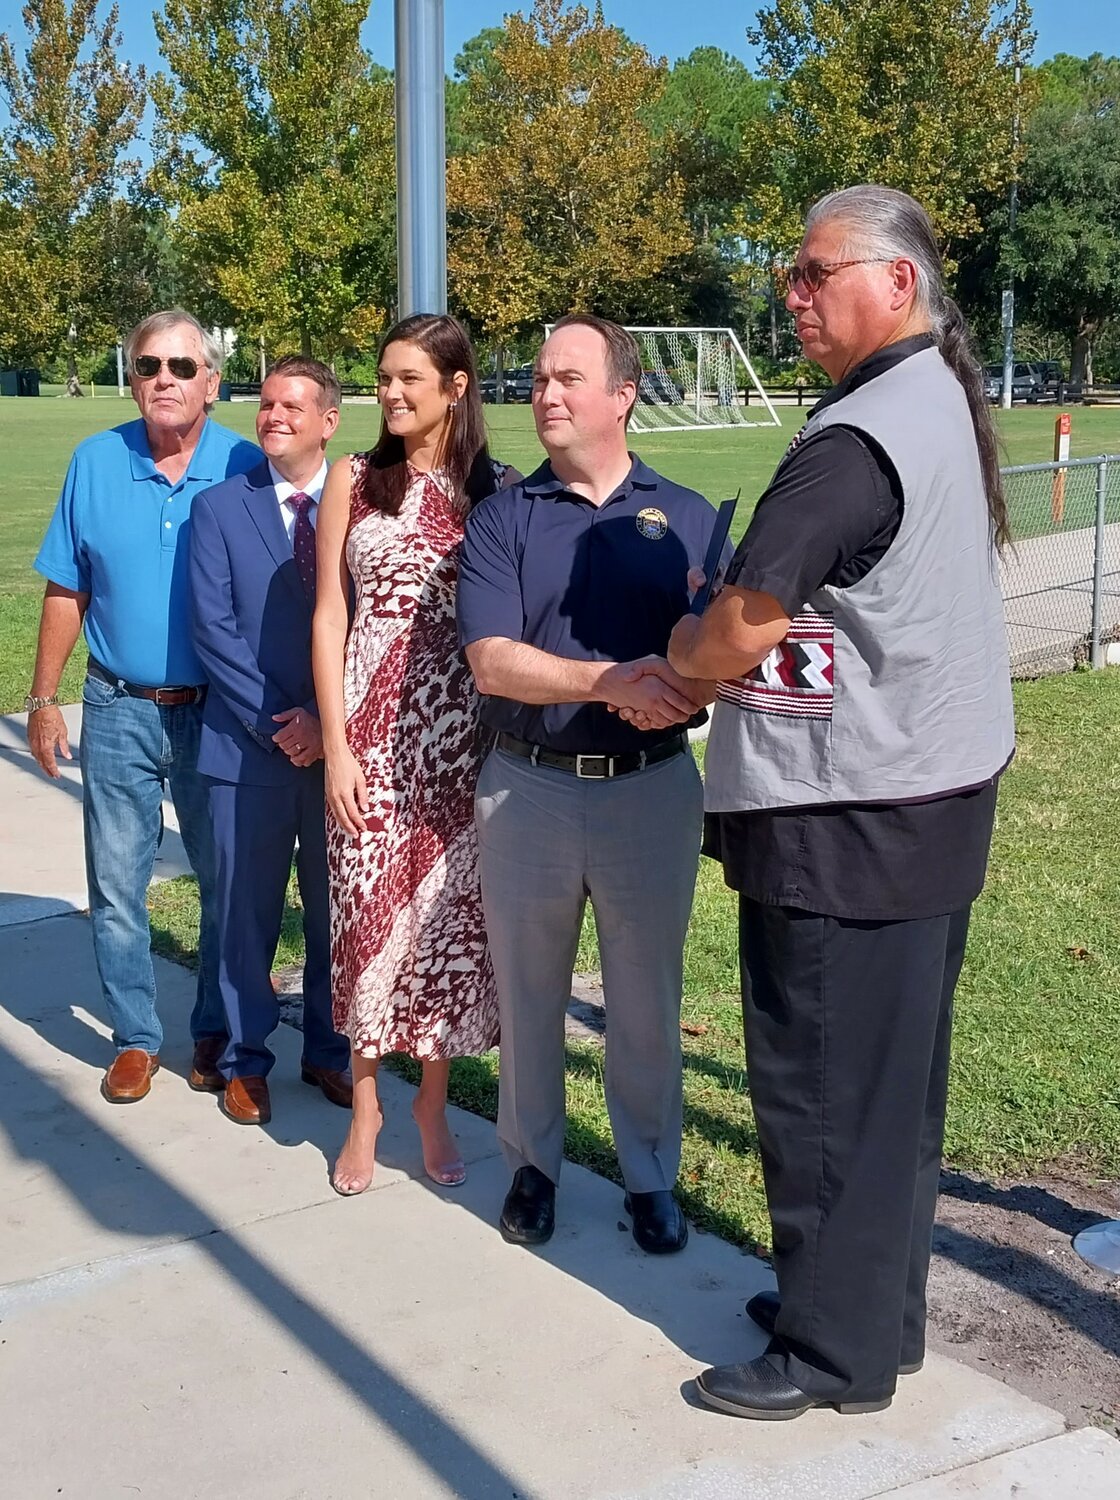 St. Johns County Commissioners Henry Dean, Roy Alaimo, Sarah S. Arnold and Christian Whitehurst, from left, stand for a photo with Principal Chief Lewis Johnson of the Seminole Nation of Oklahoma.